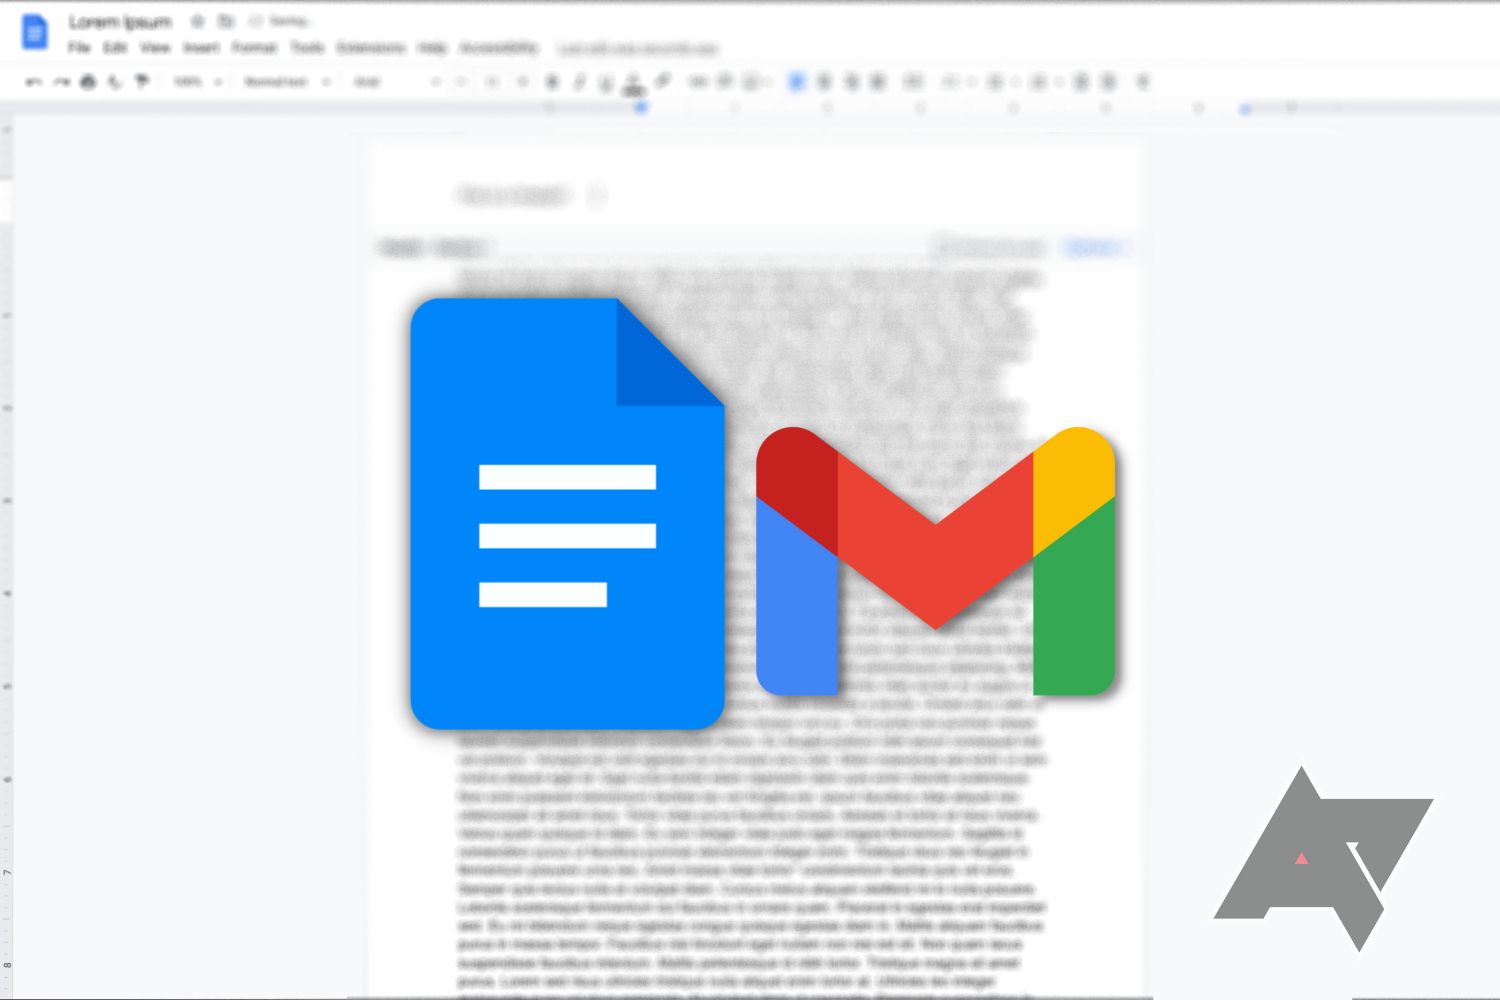 The Google Docs and Gmail logos on top of a blurred Google Docs document